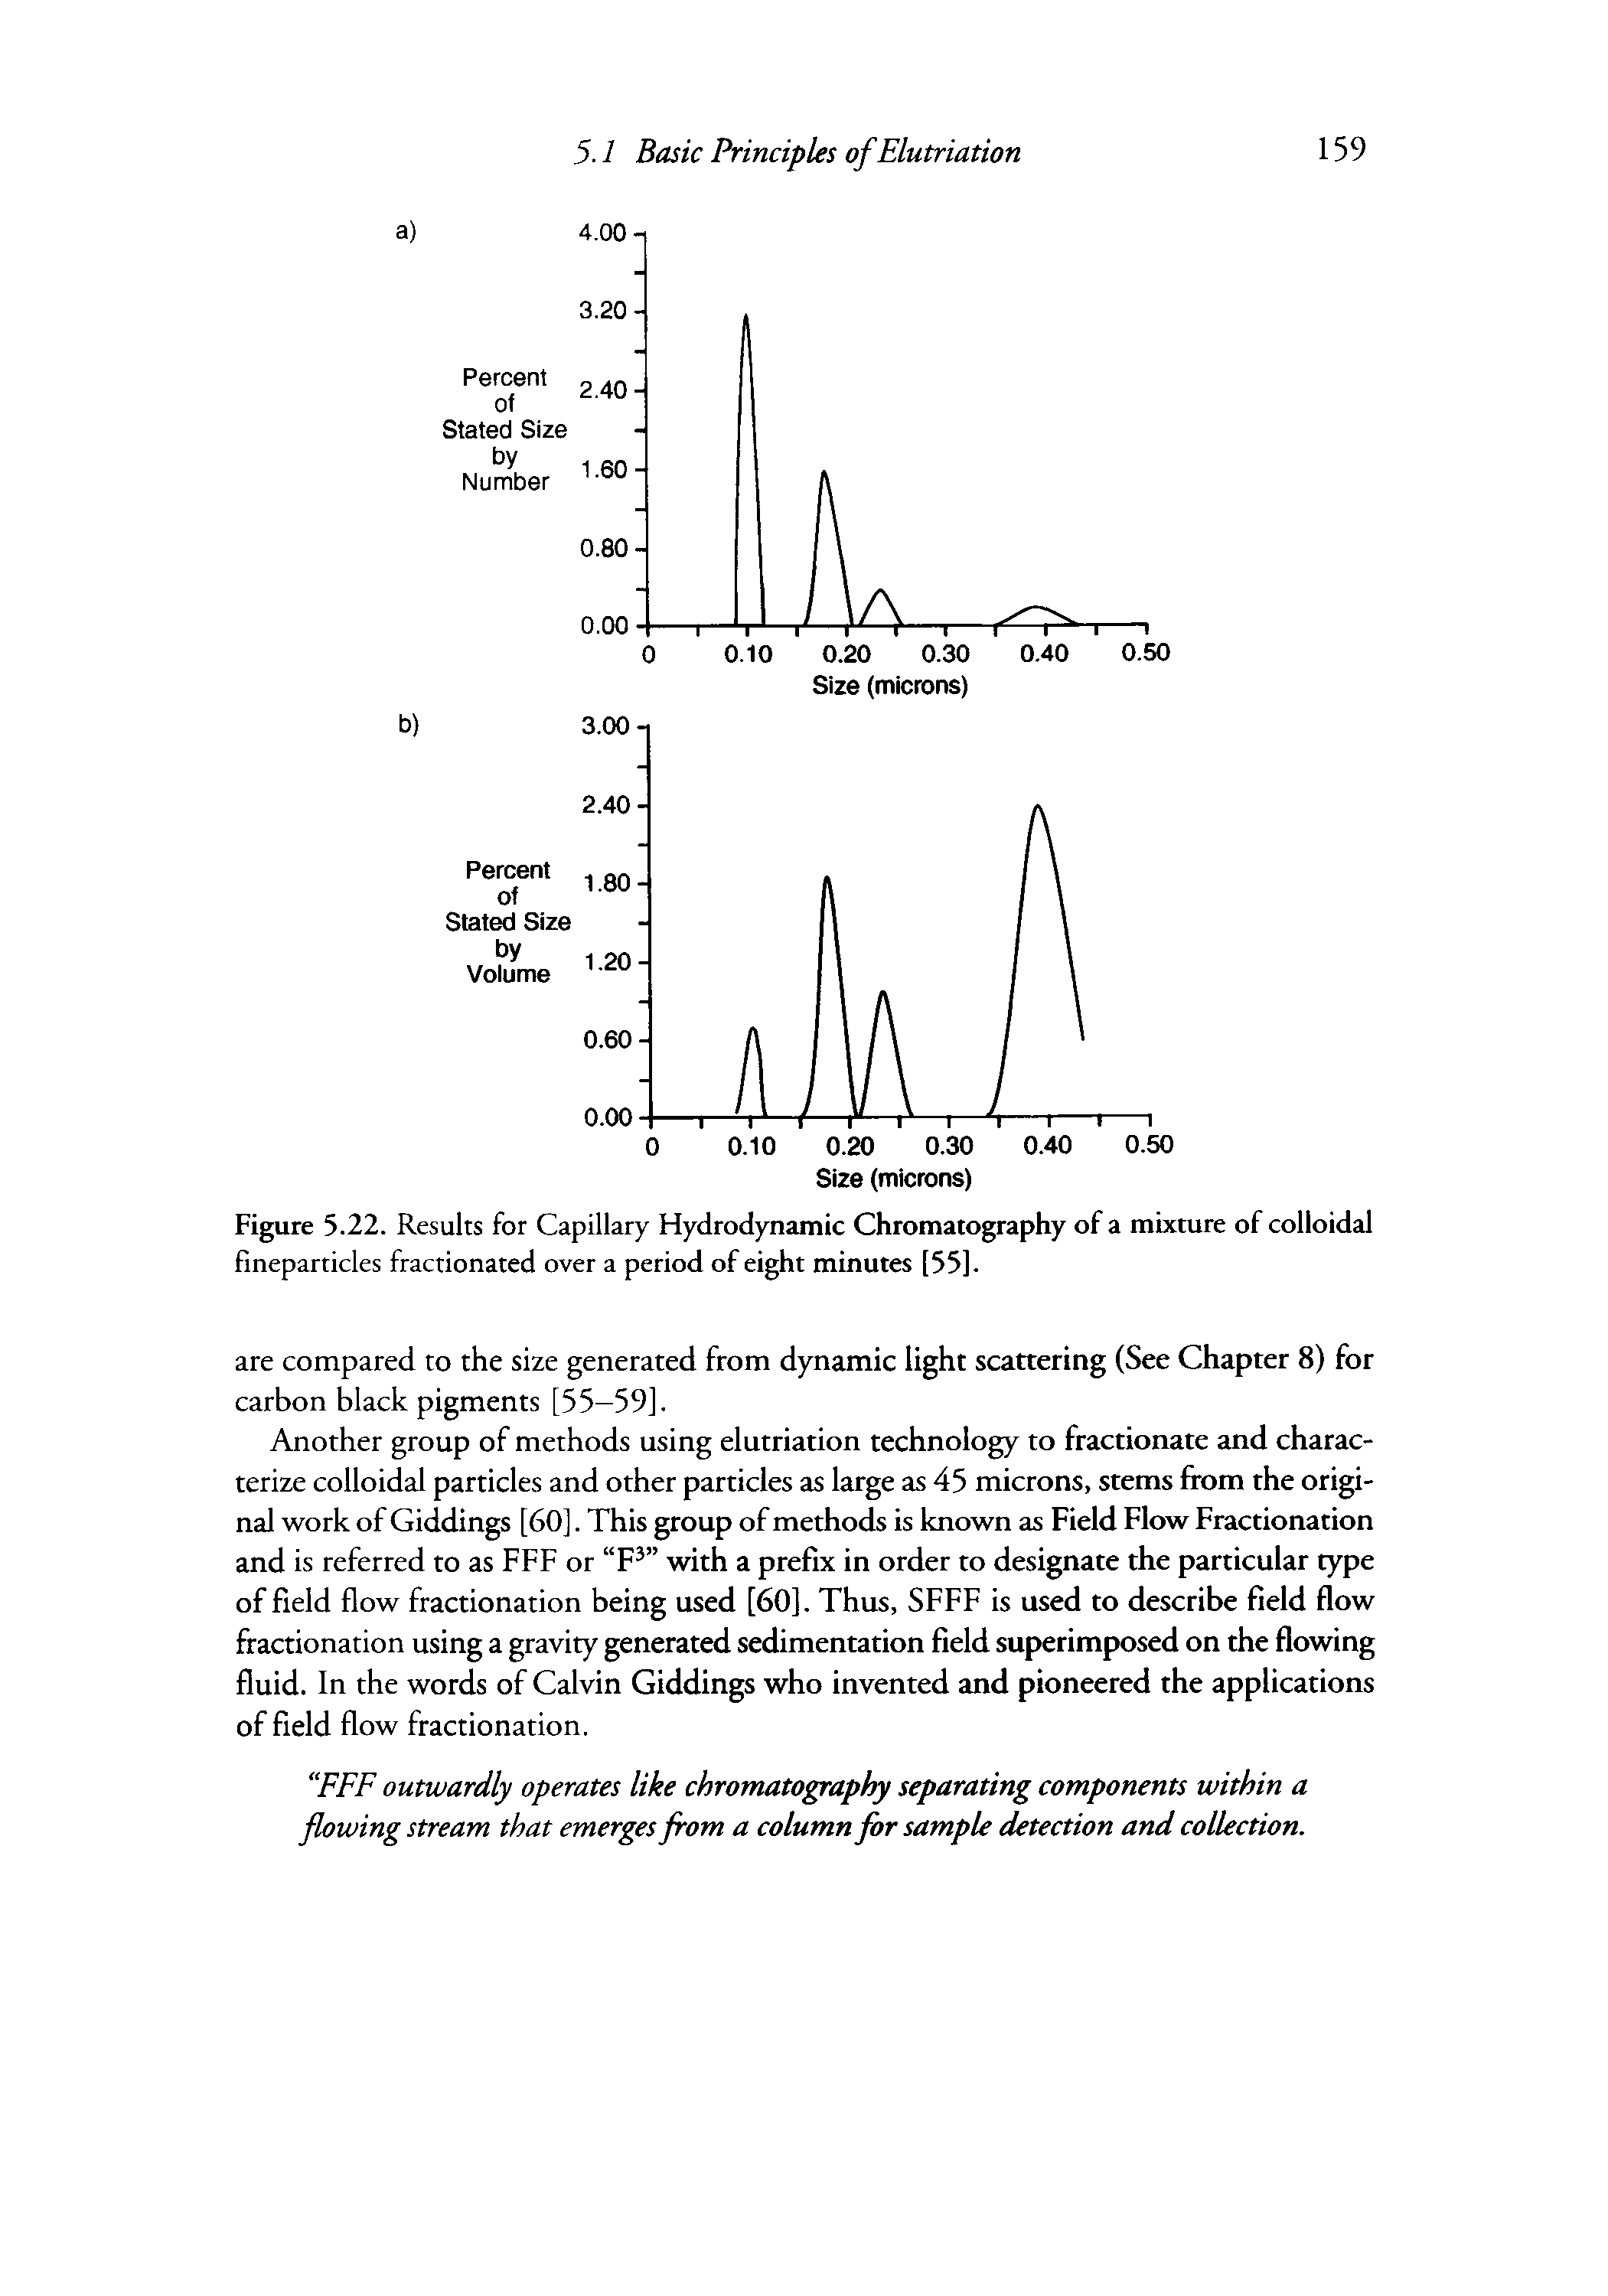 Figure 5.22. Results for Capillary Hydrodynamic Chromatography of a mixture of colloidal fmeparticles fractionated over a period of eight minutes [55].